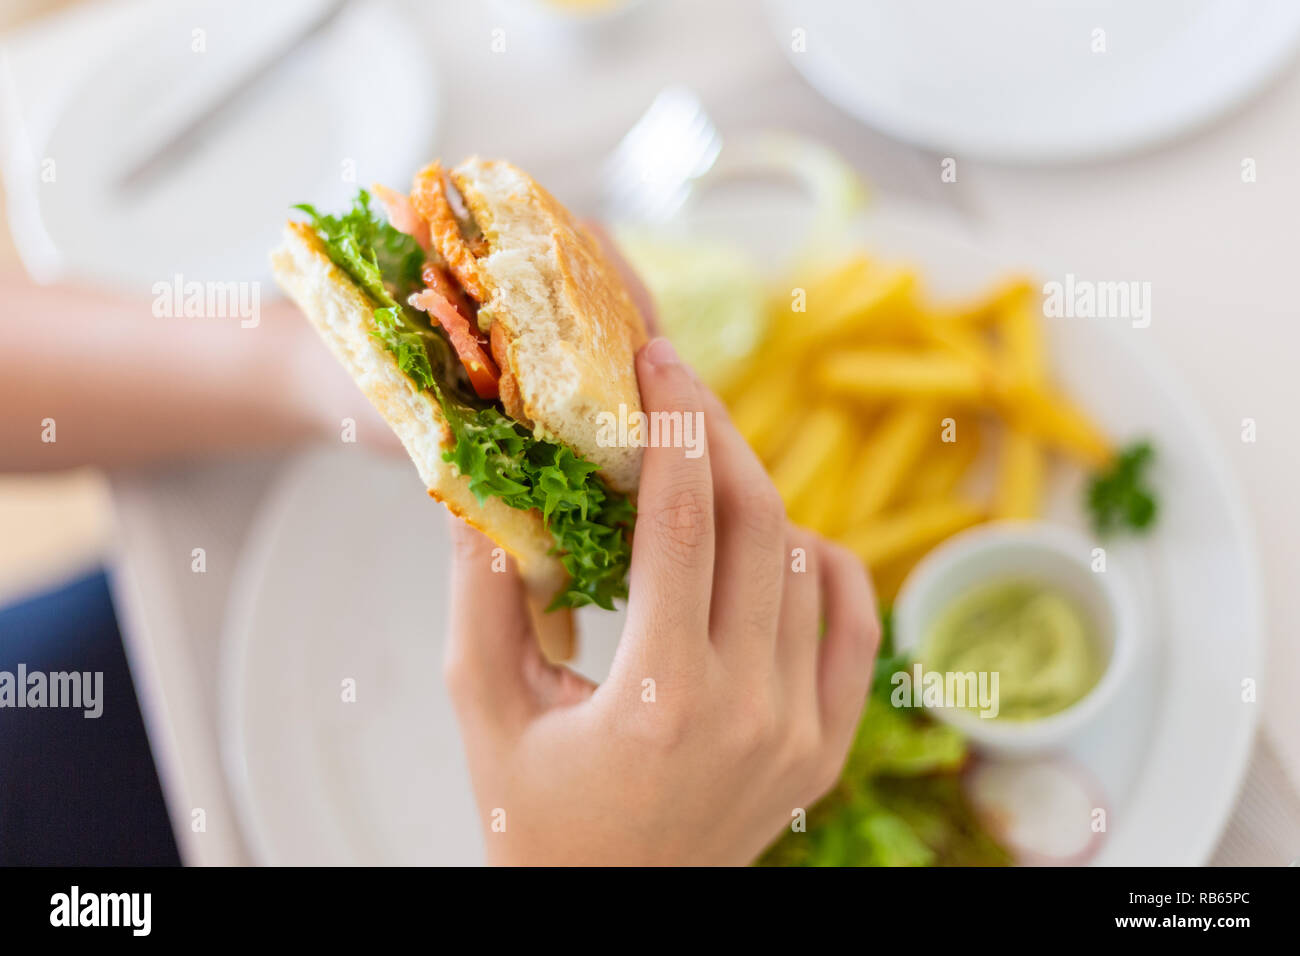 Young female hand holding her half eaten salmon sandwich with the blurred background of french fries,  good for fast food or health concept Stock Photo